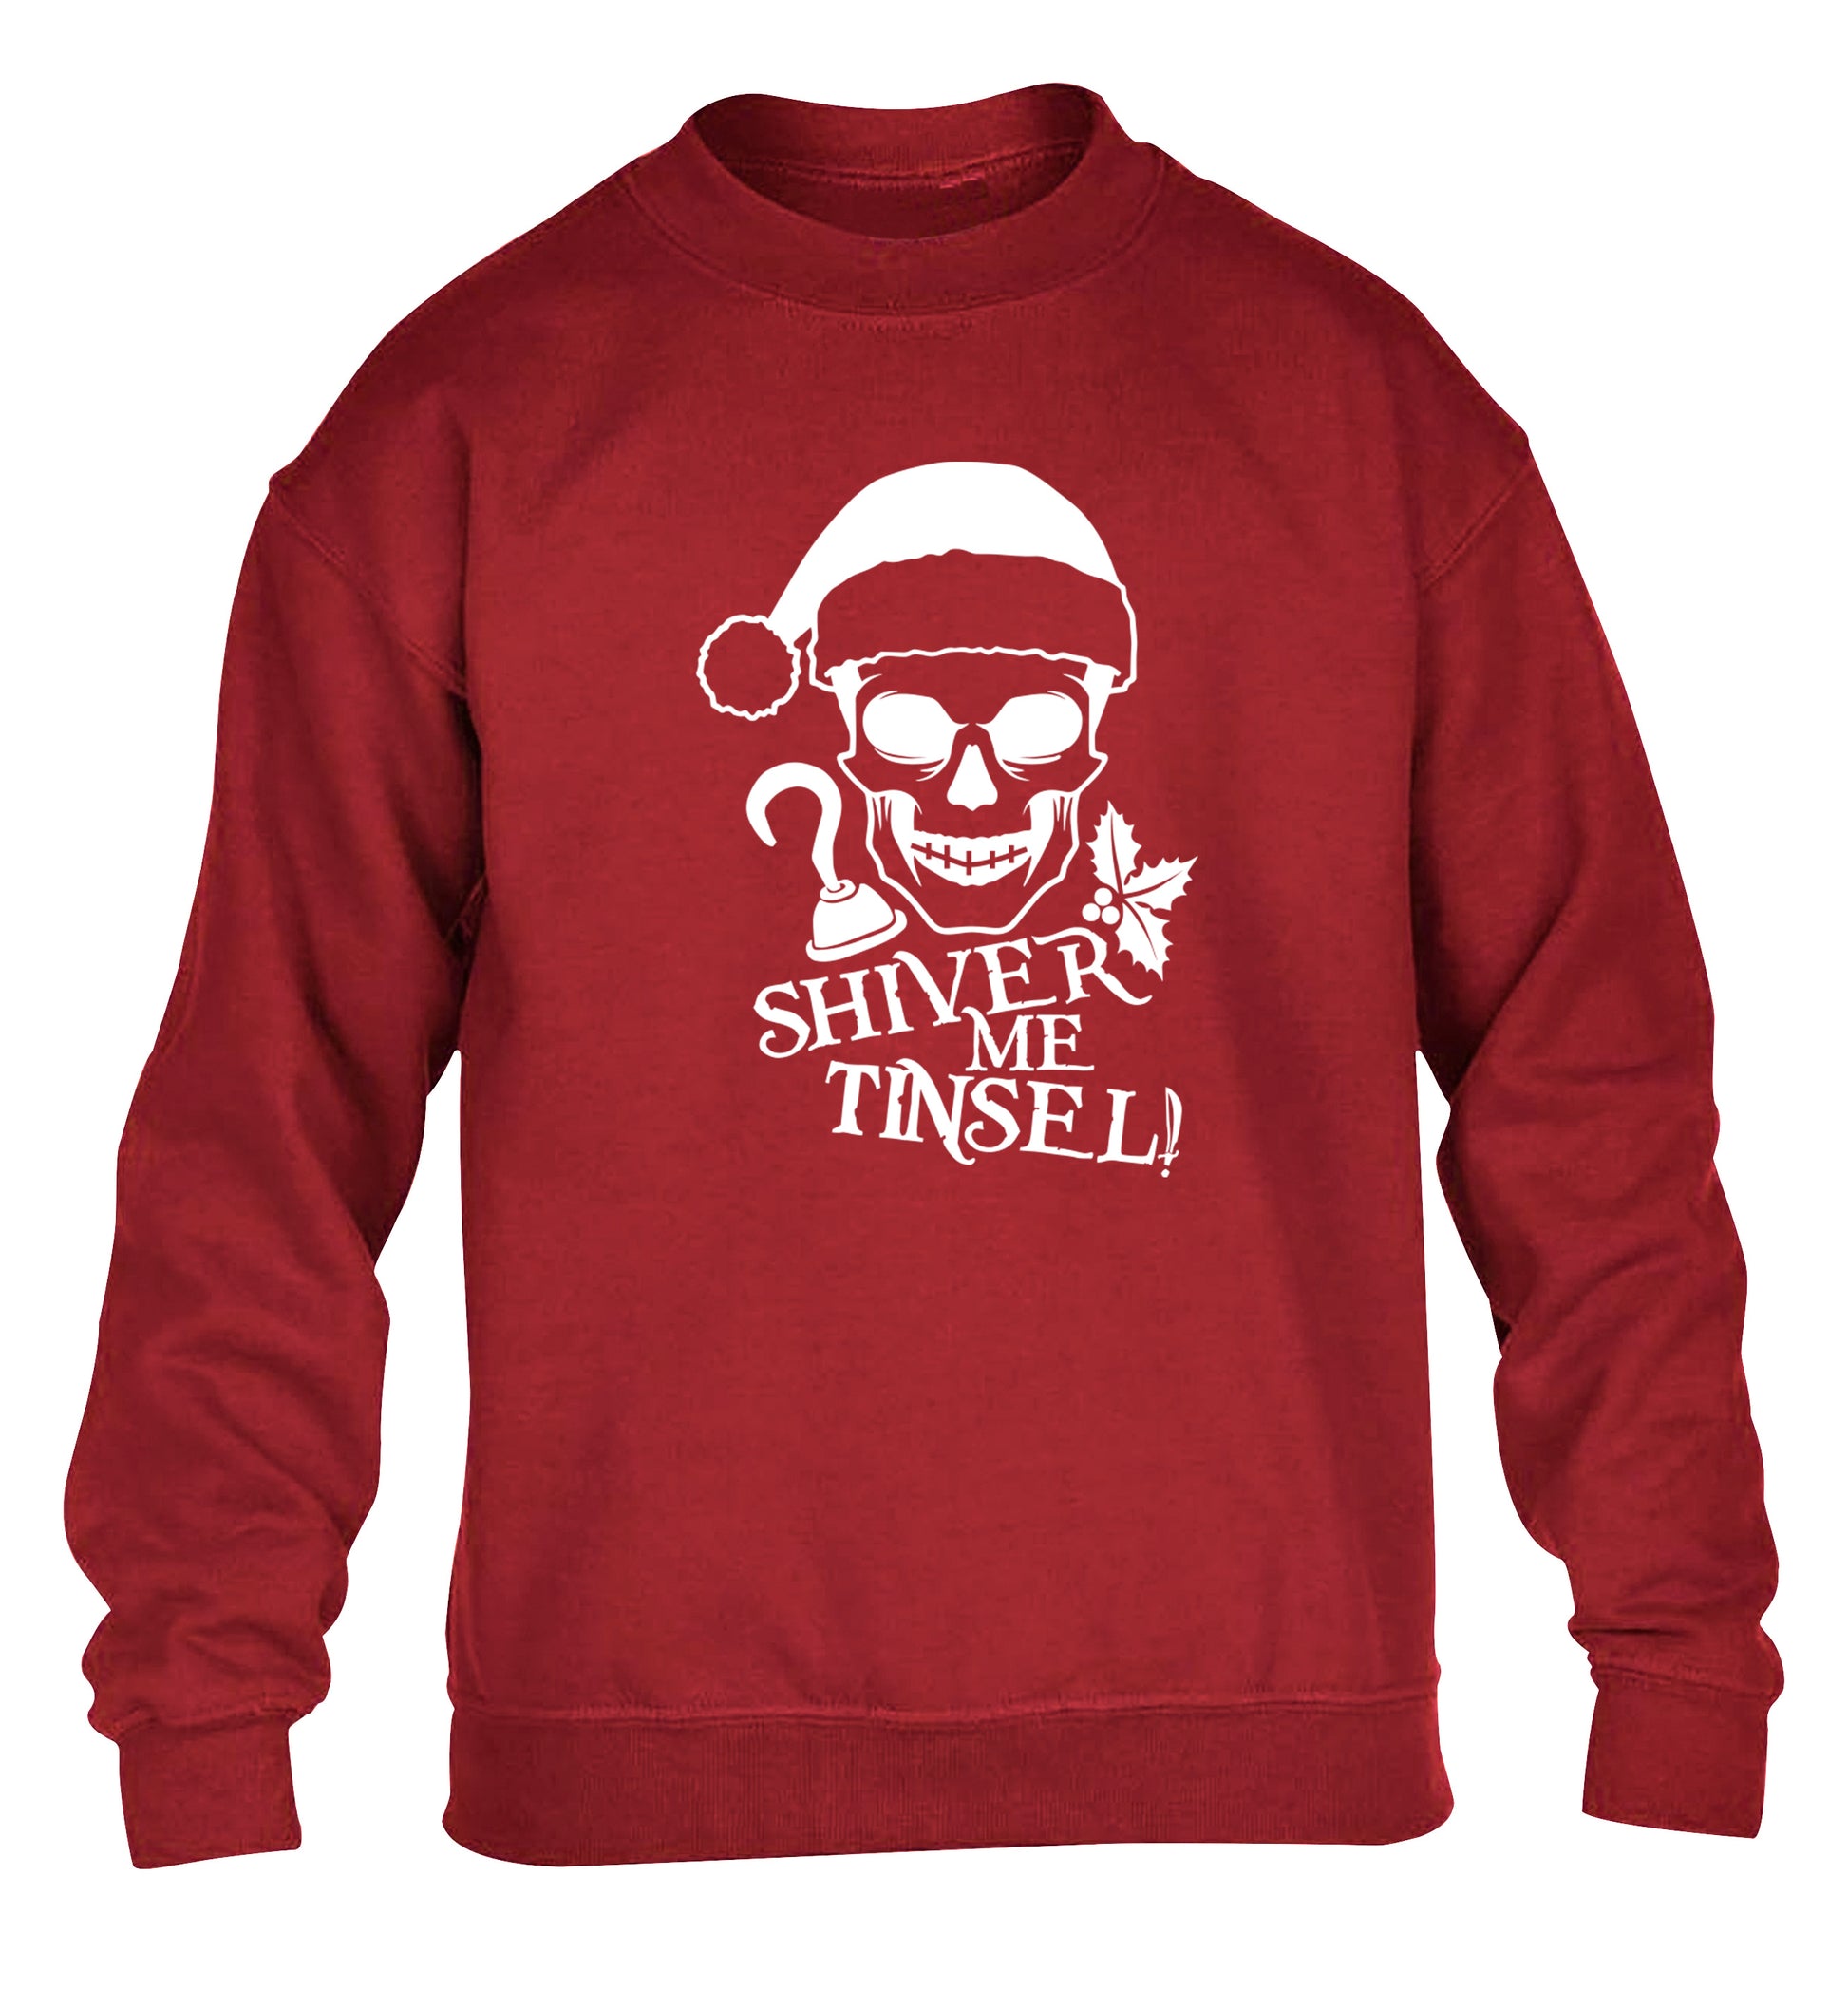 Shiver me tinsel children's grey sweater 12-14 Years